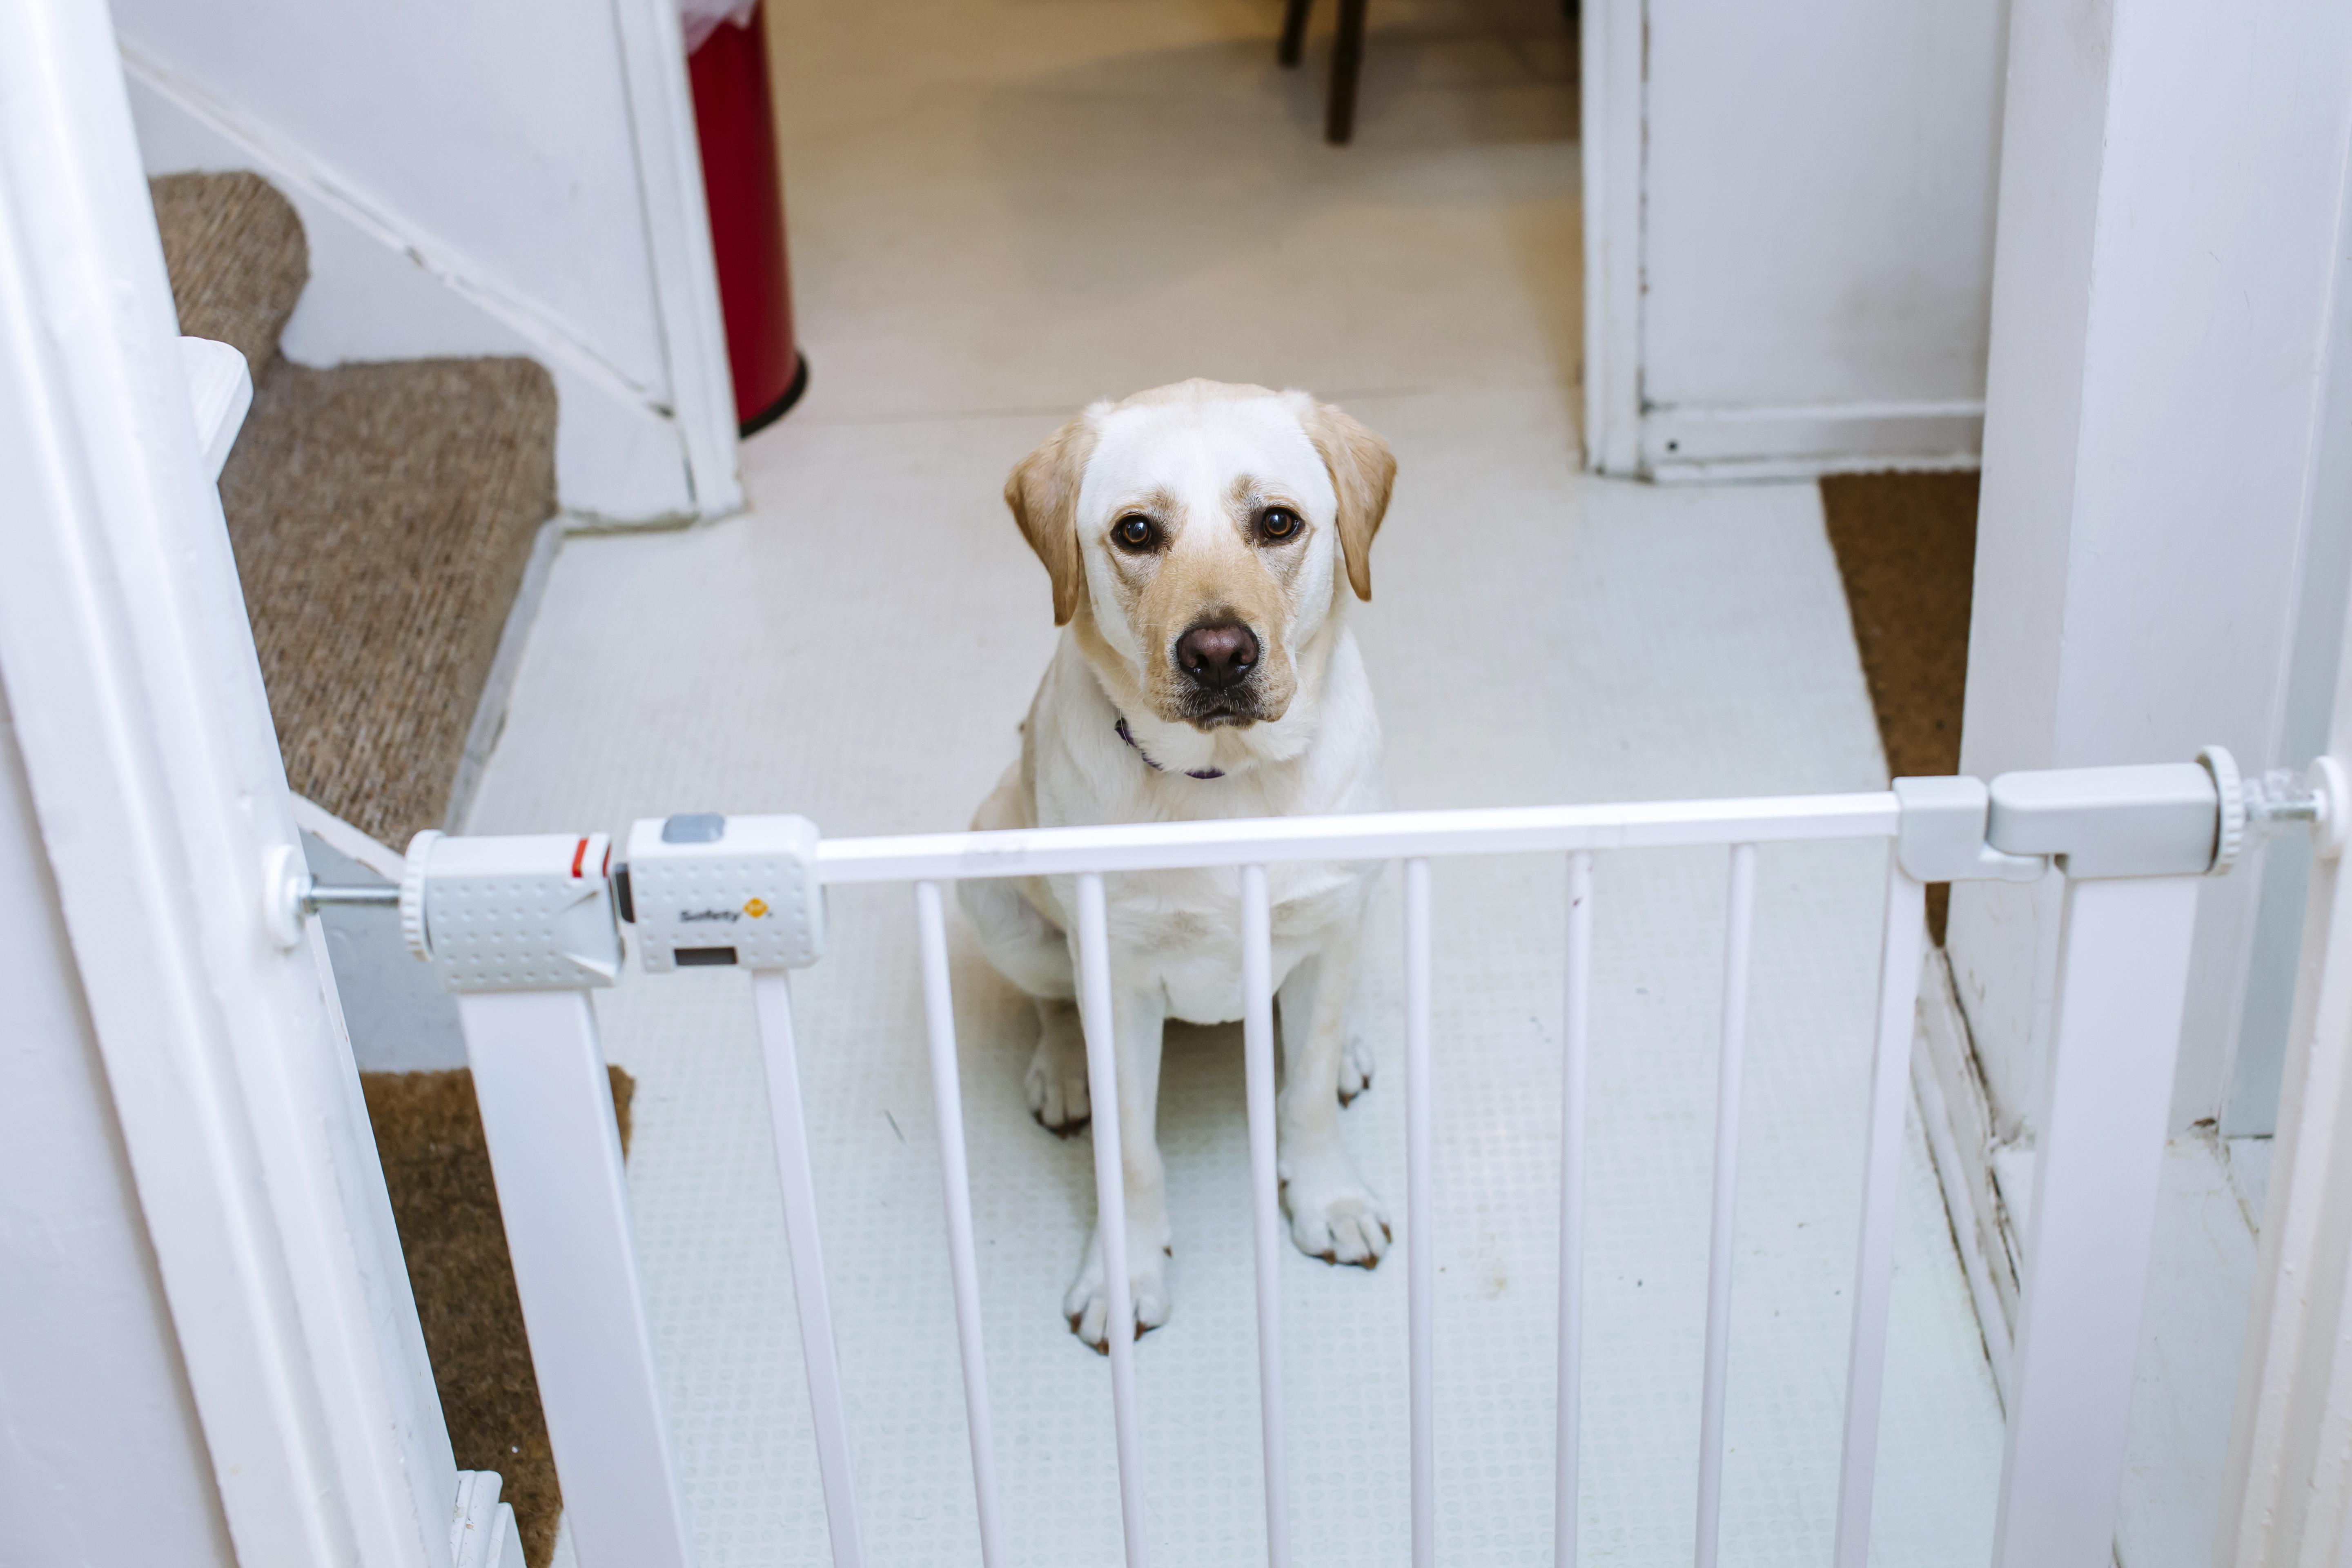 Preventing separation anxiety in puppies